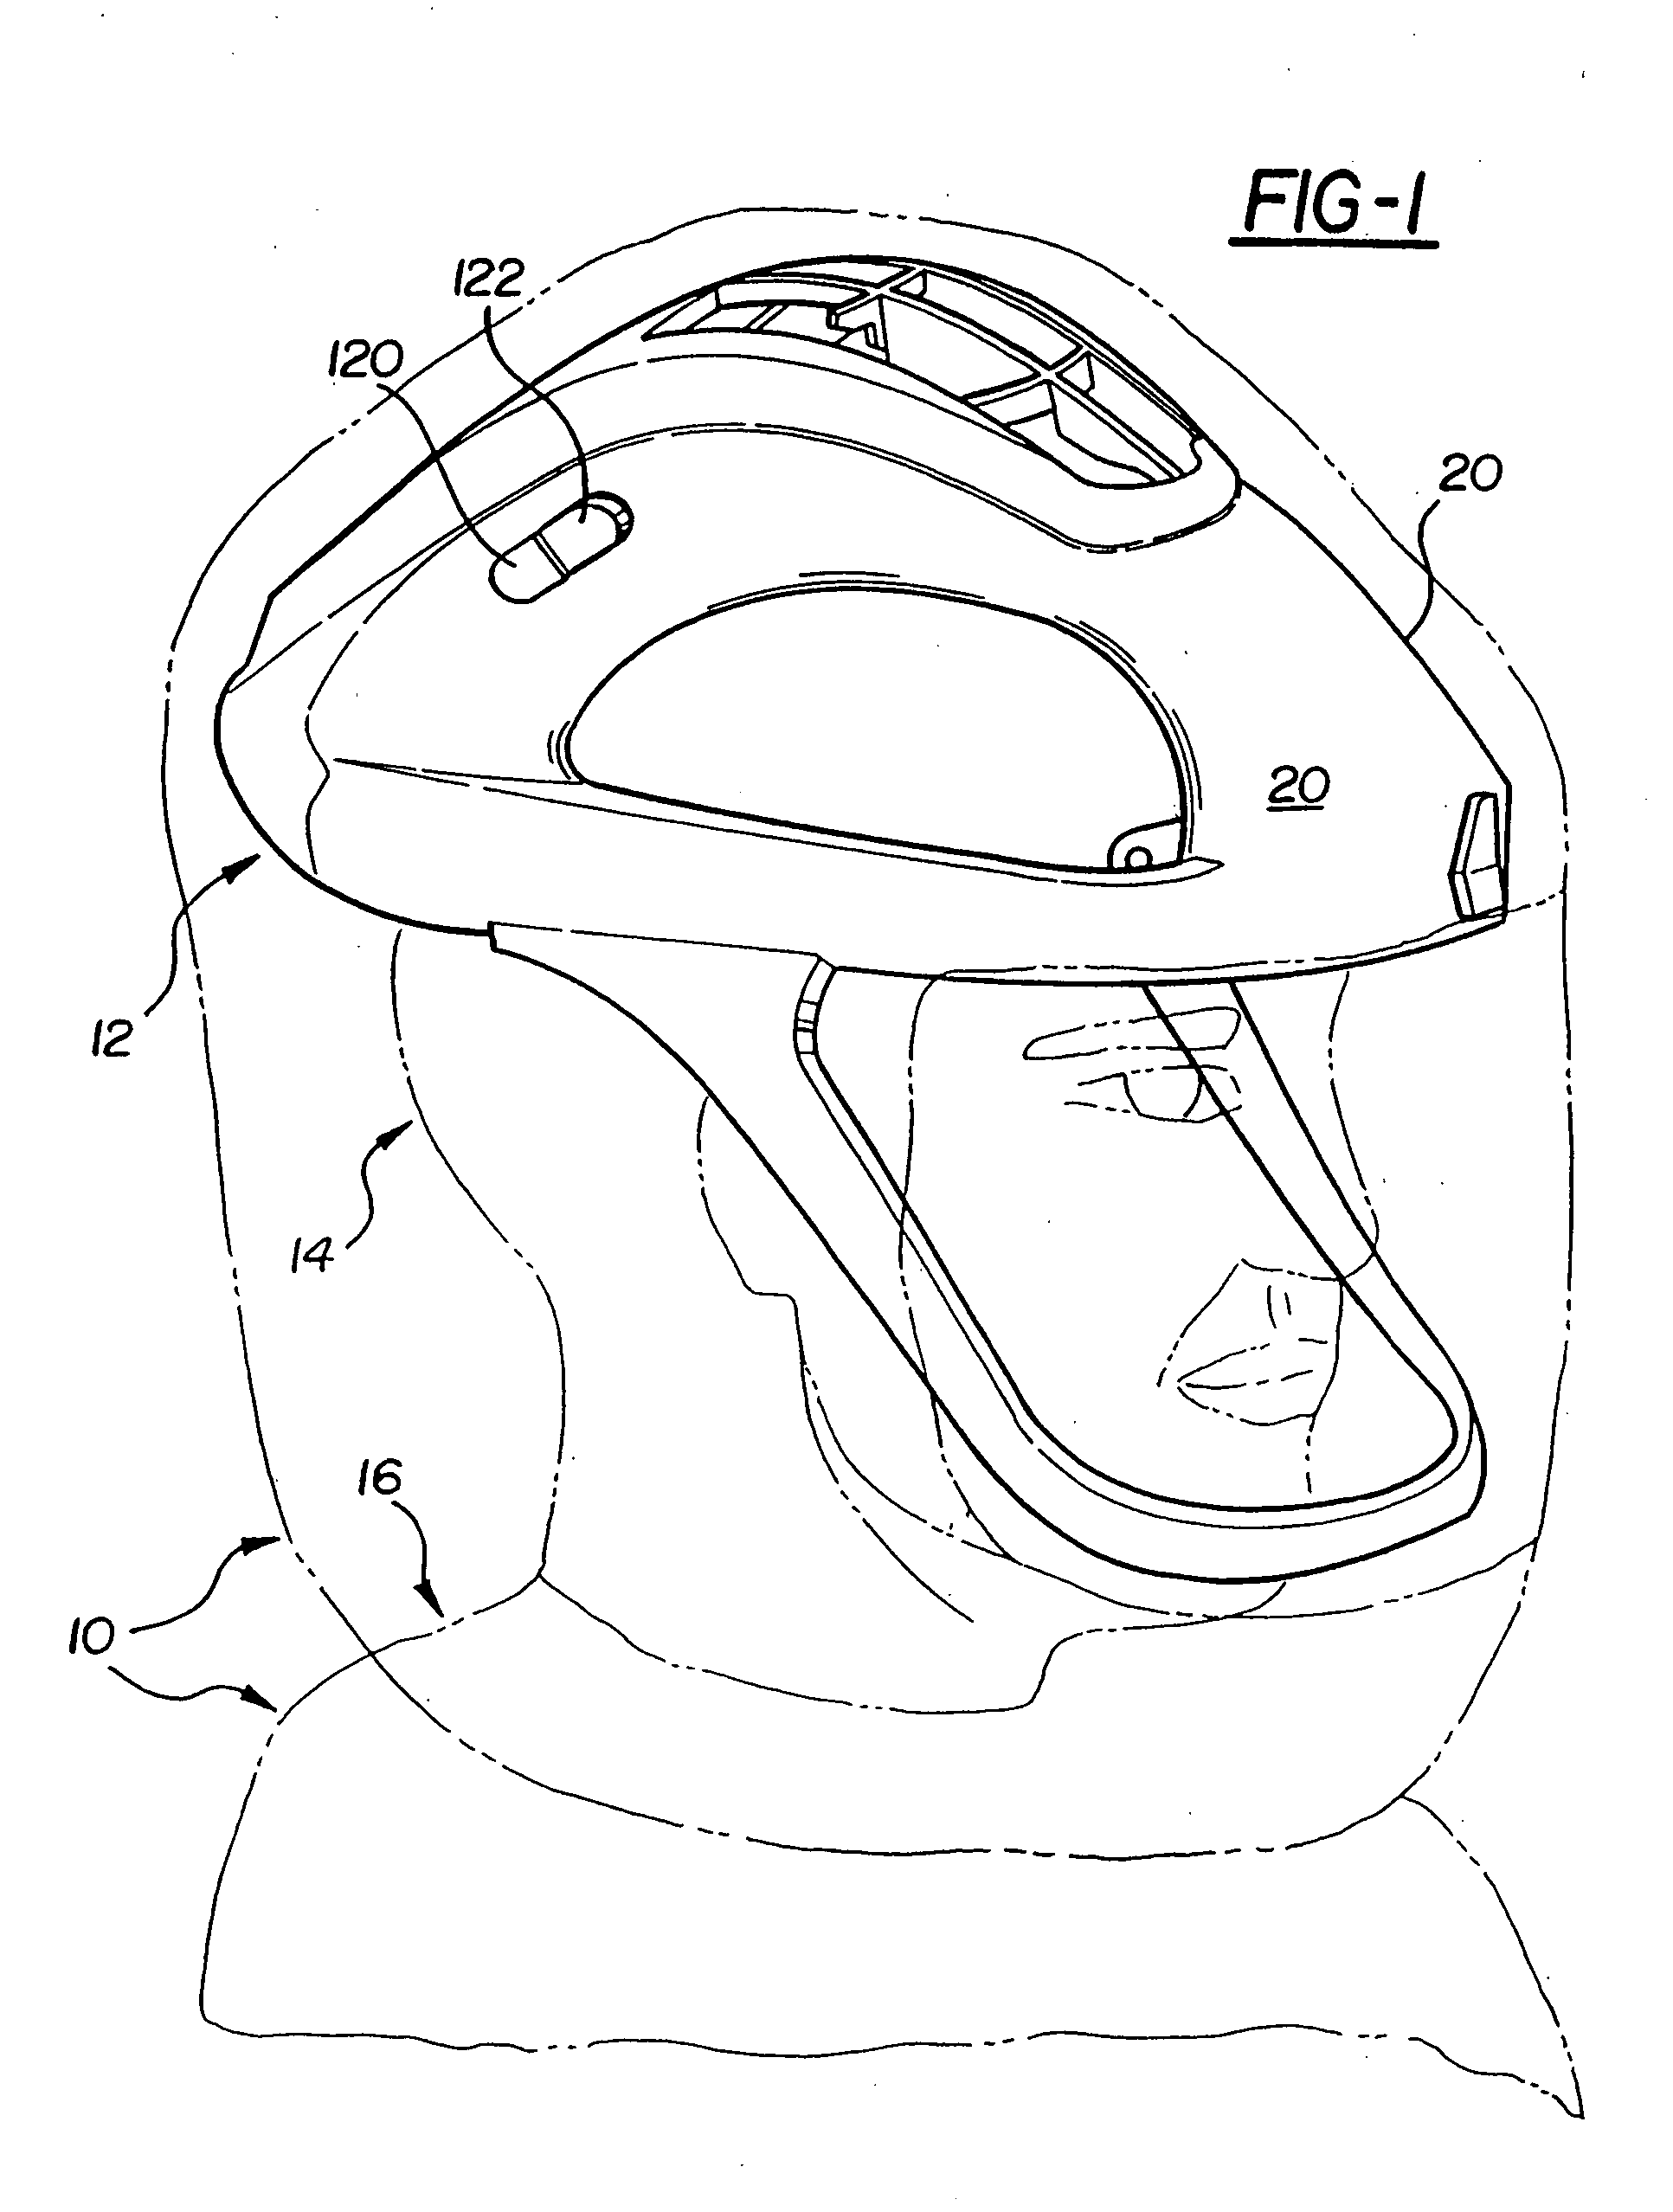 Air filtration system including a helmet assembly